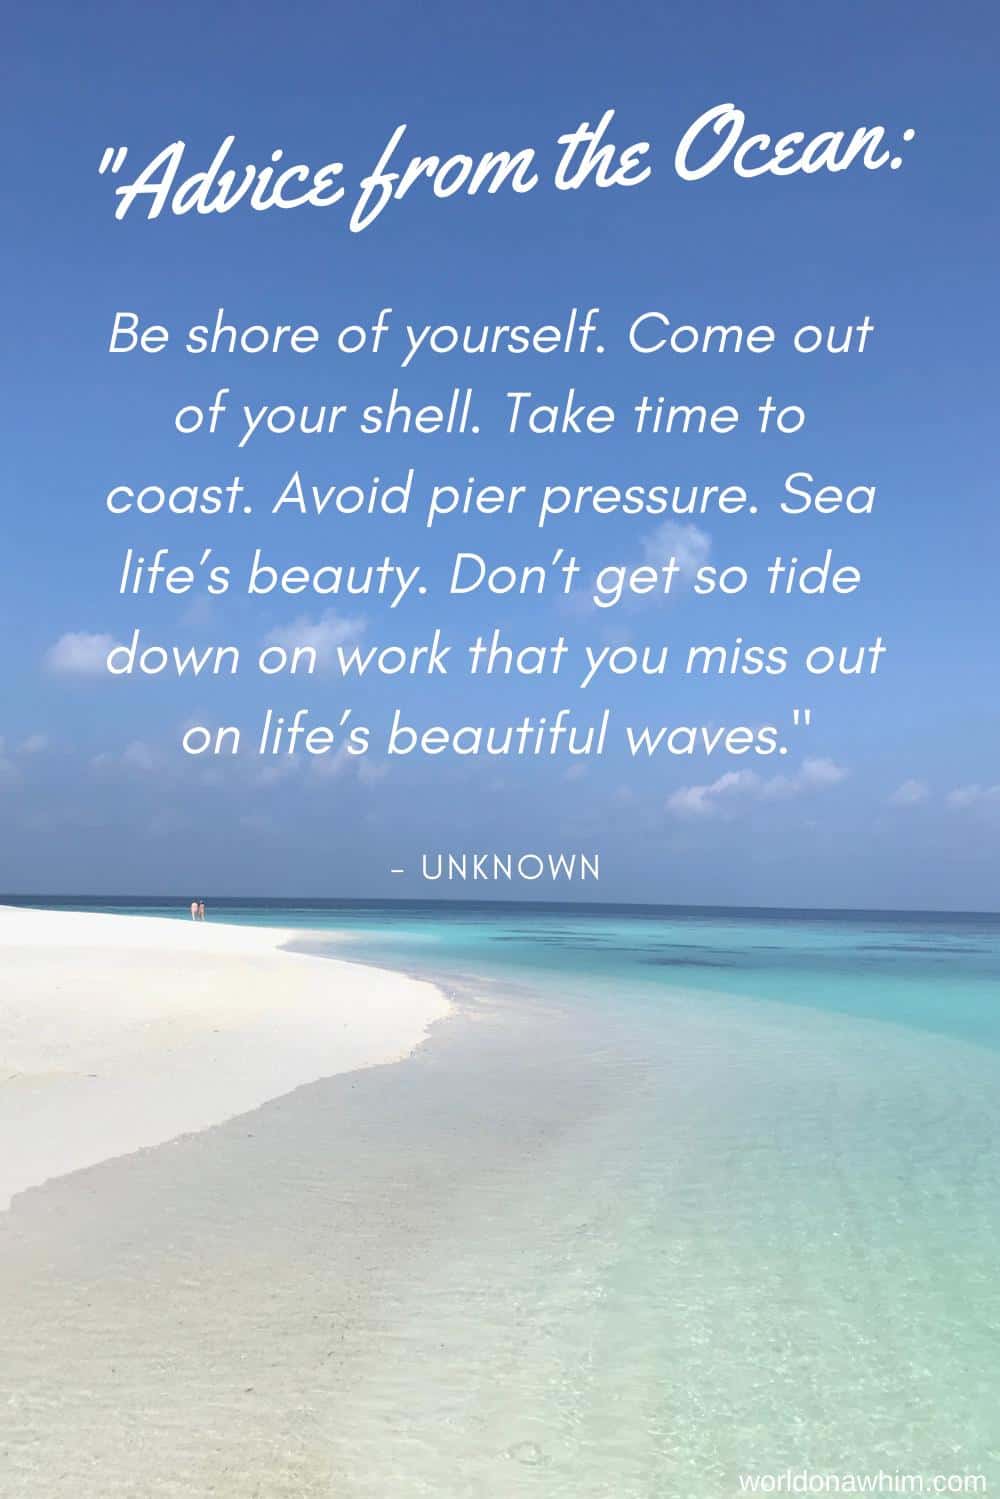 30 Best Beach Quotes You Need to Read - World On A Whim